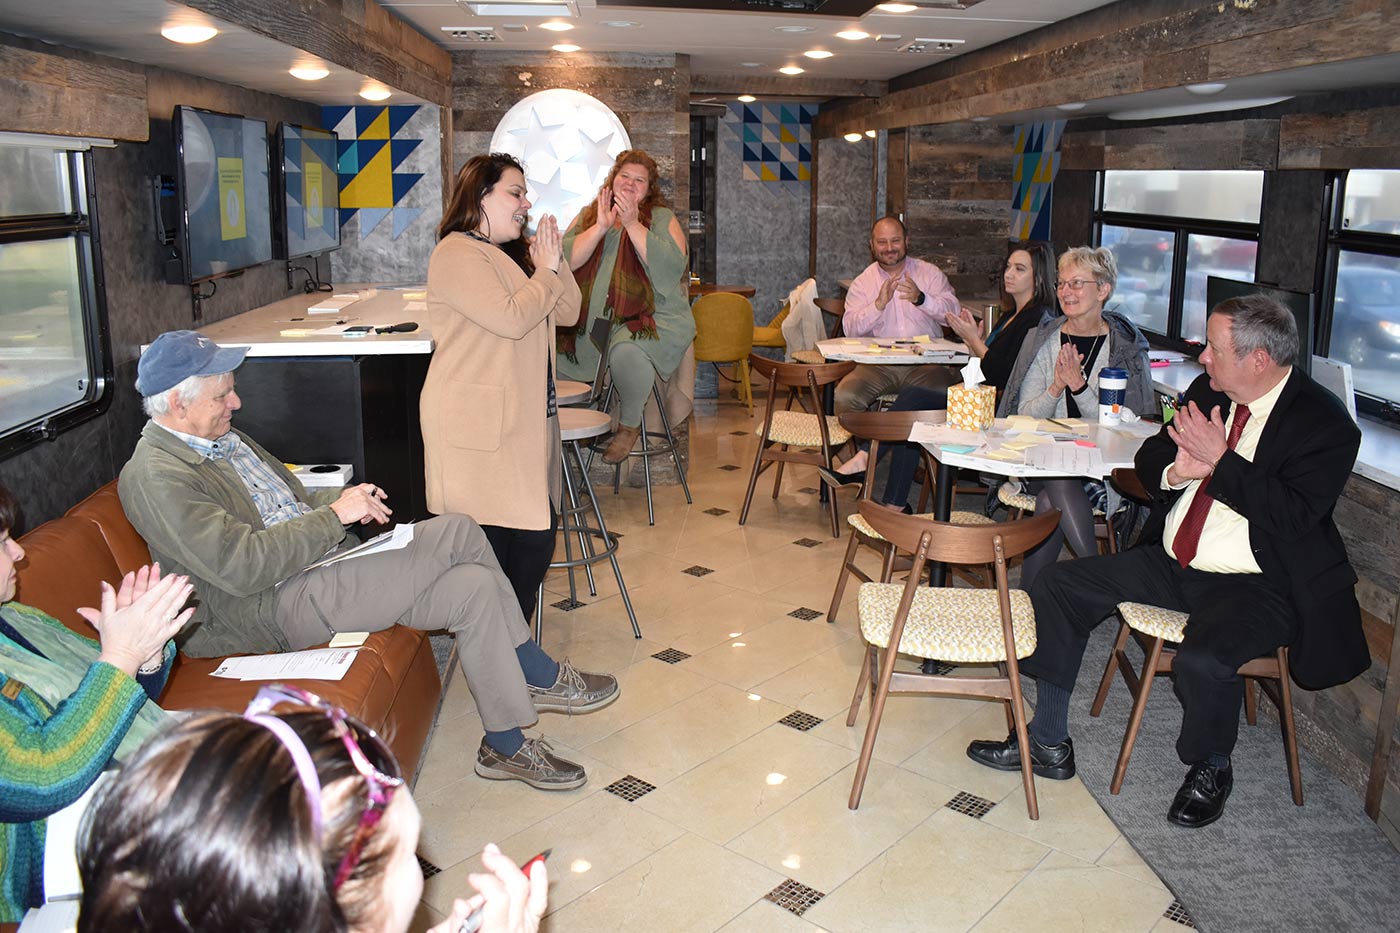 Attendees at a workshop for business owners and aspiring entrepreneurs applaud following a presentation inside a state-funded bus parked outside the Cumberland Business Incubator.